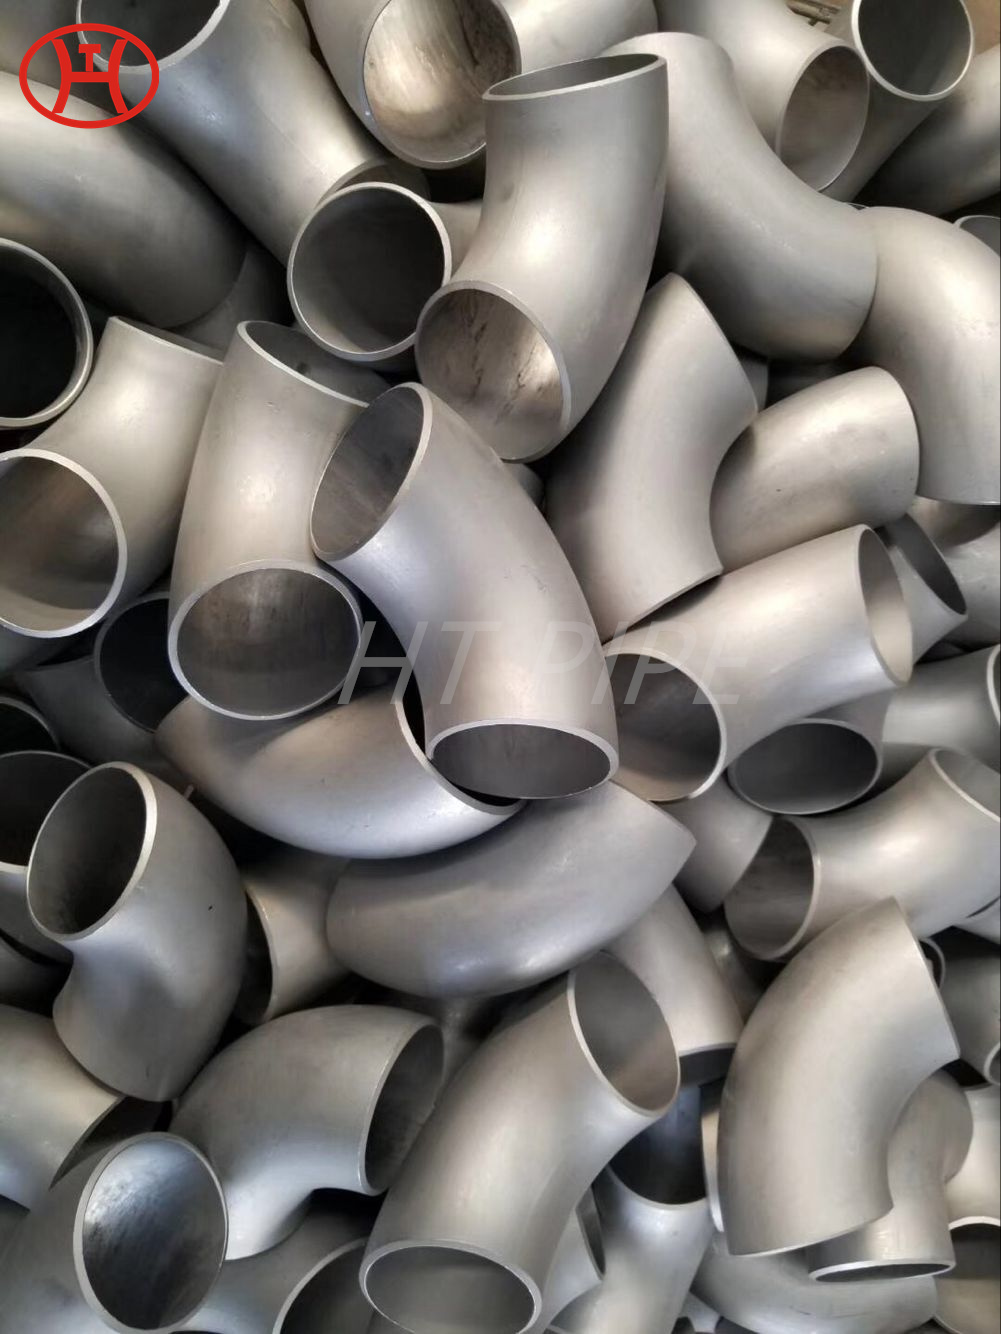 1-4 inch stainless steel pipe fittings best sanitary elbows